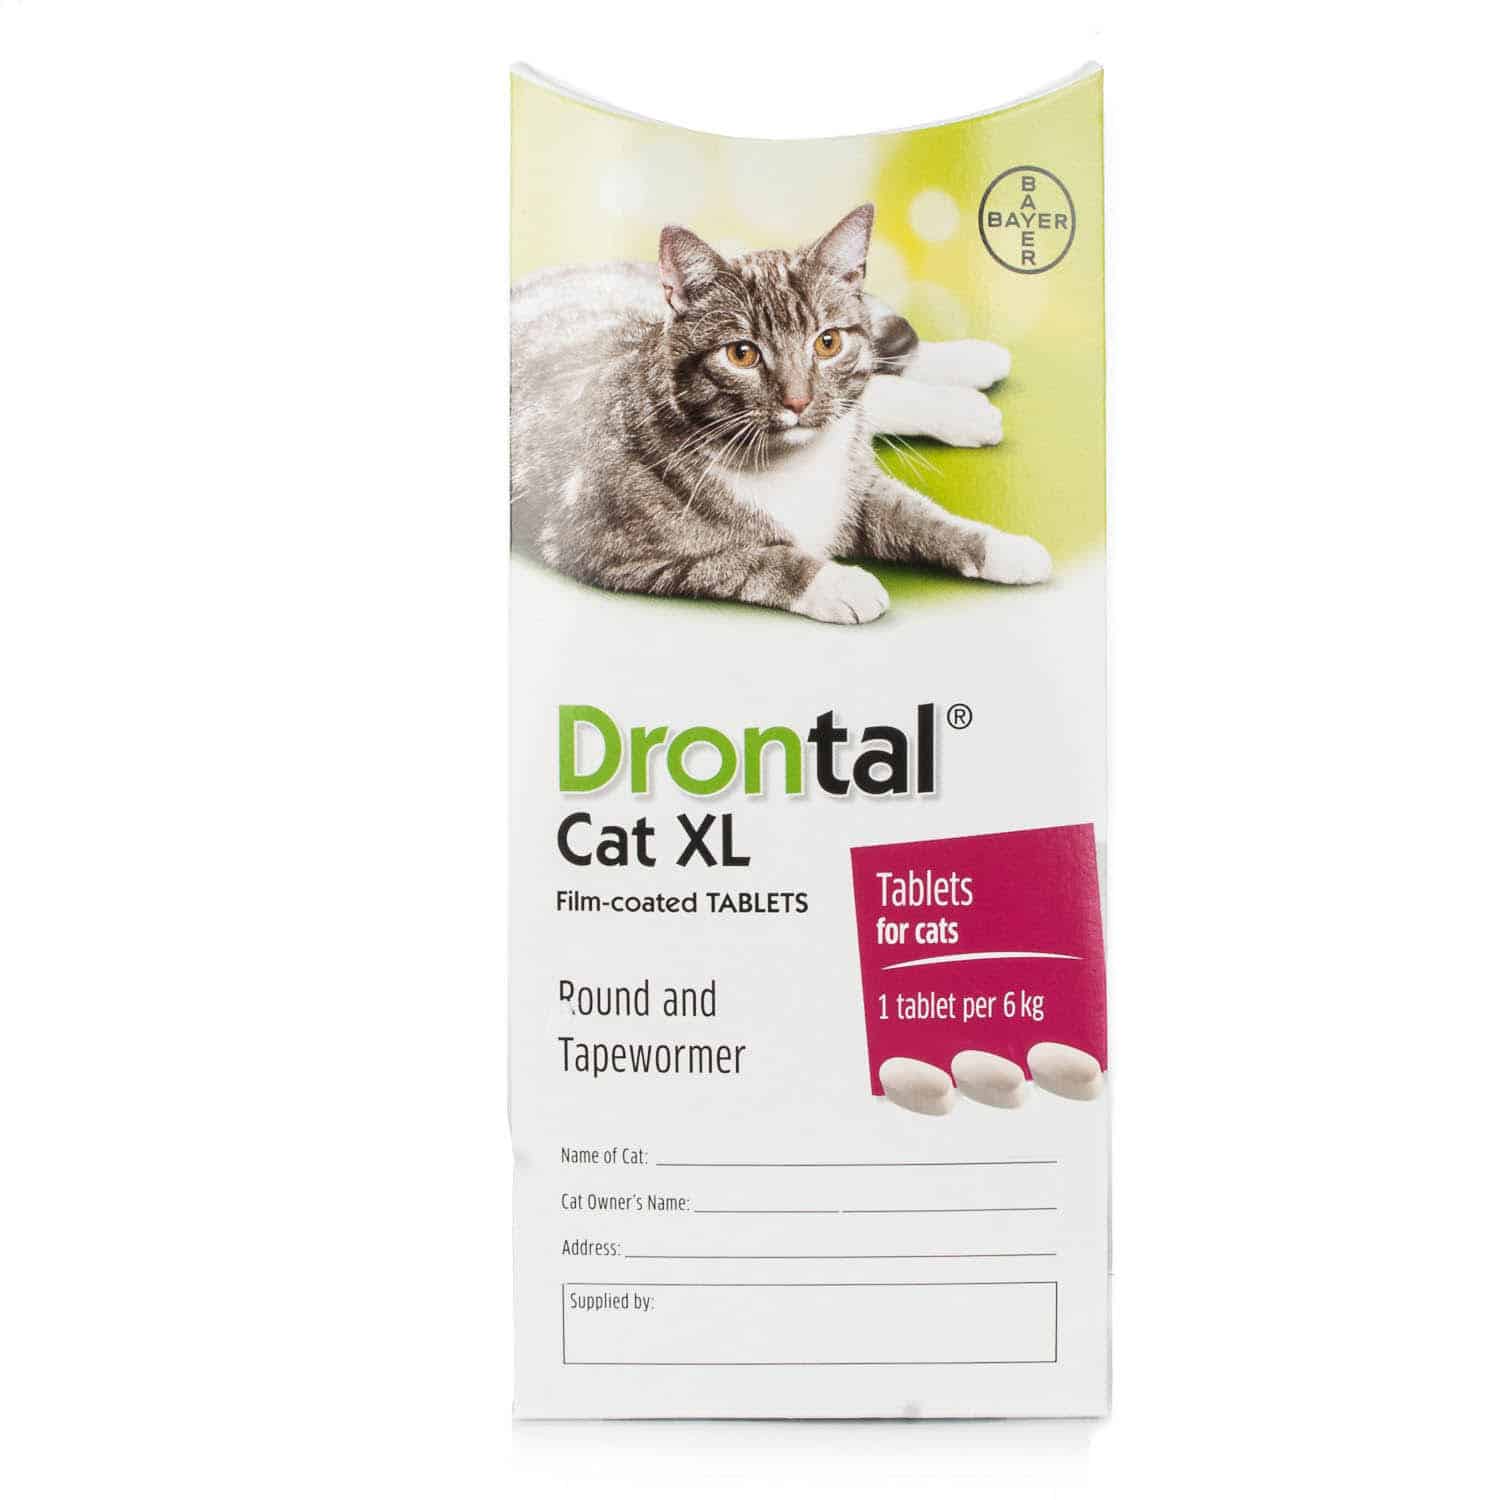 Drontal Cat XL Worming Tablets Triple Pack